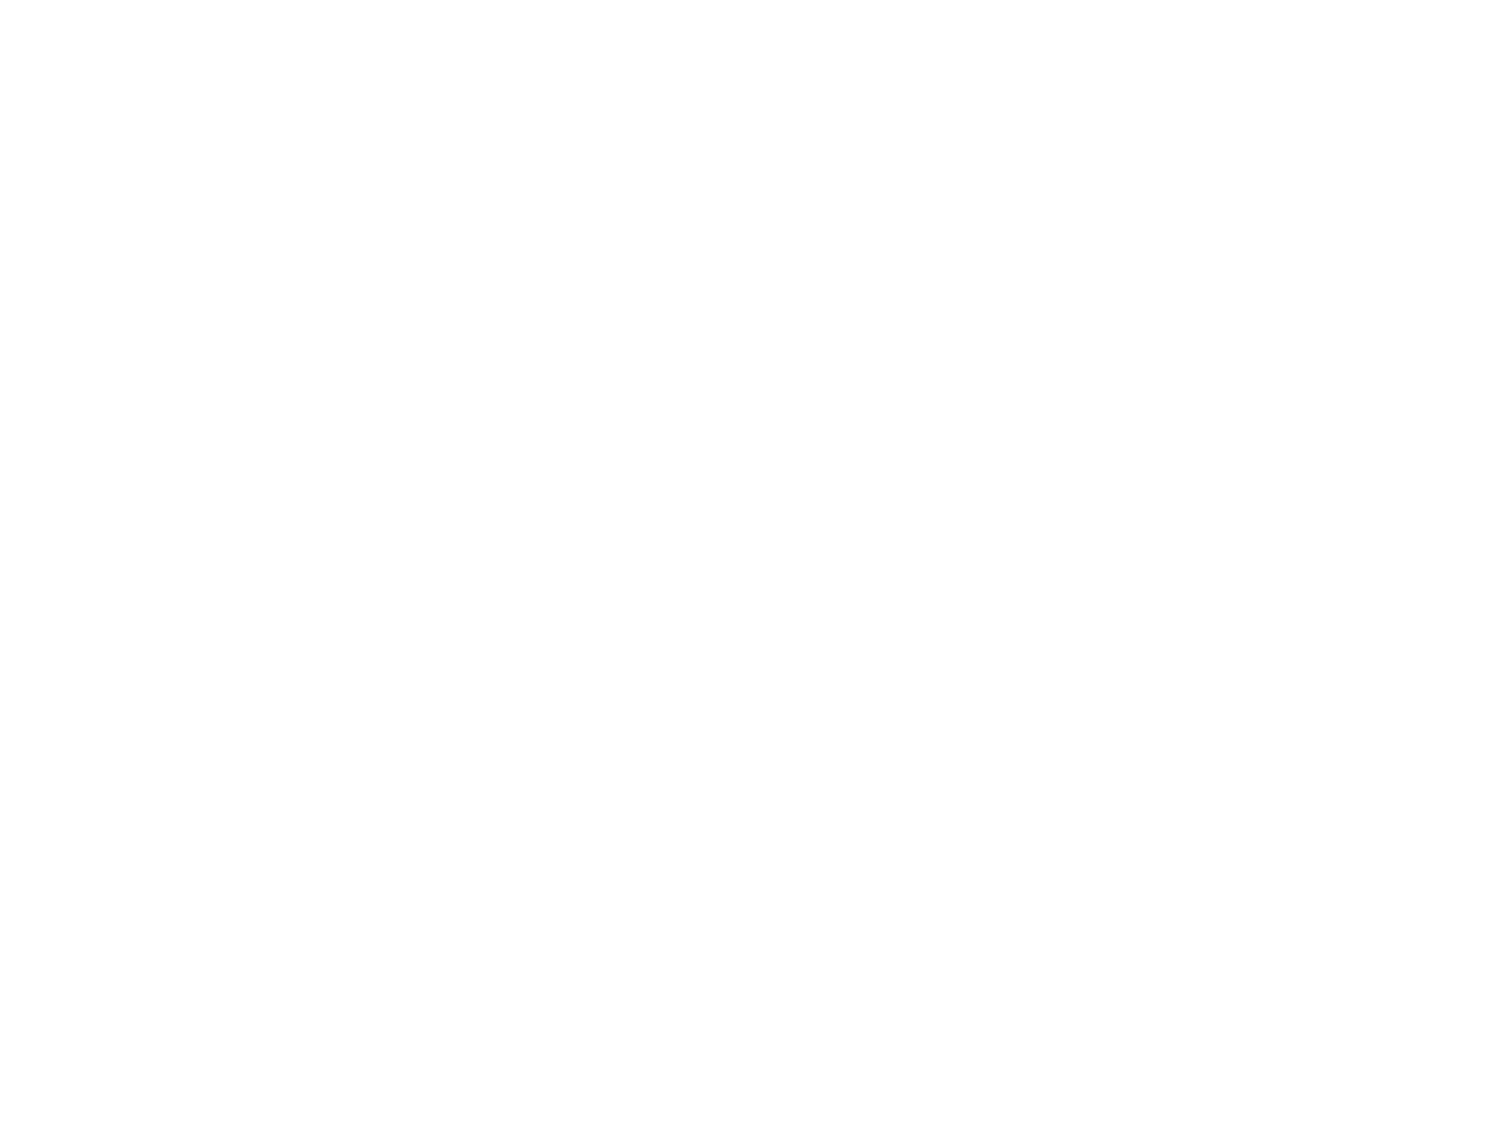 Center for Psychotherapy, Spirituality & Creativity